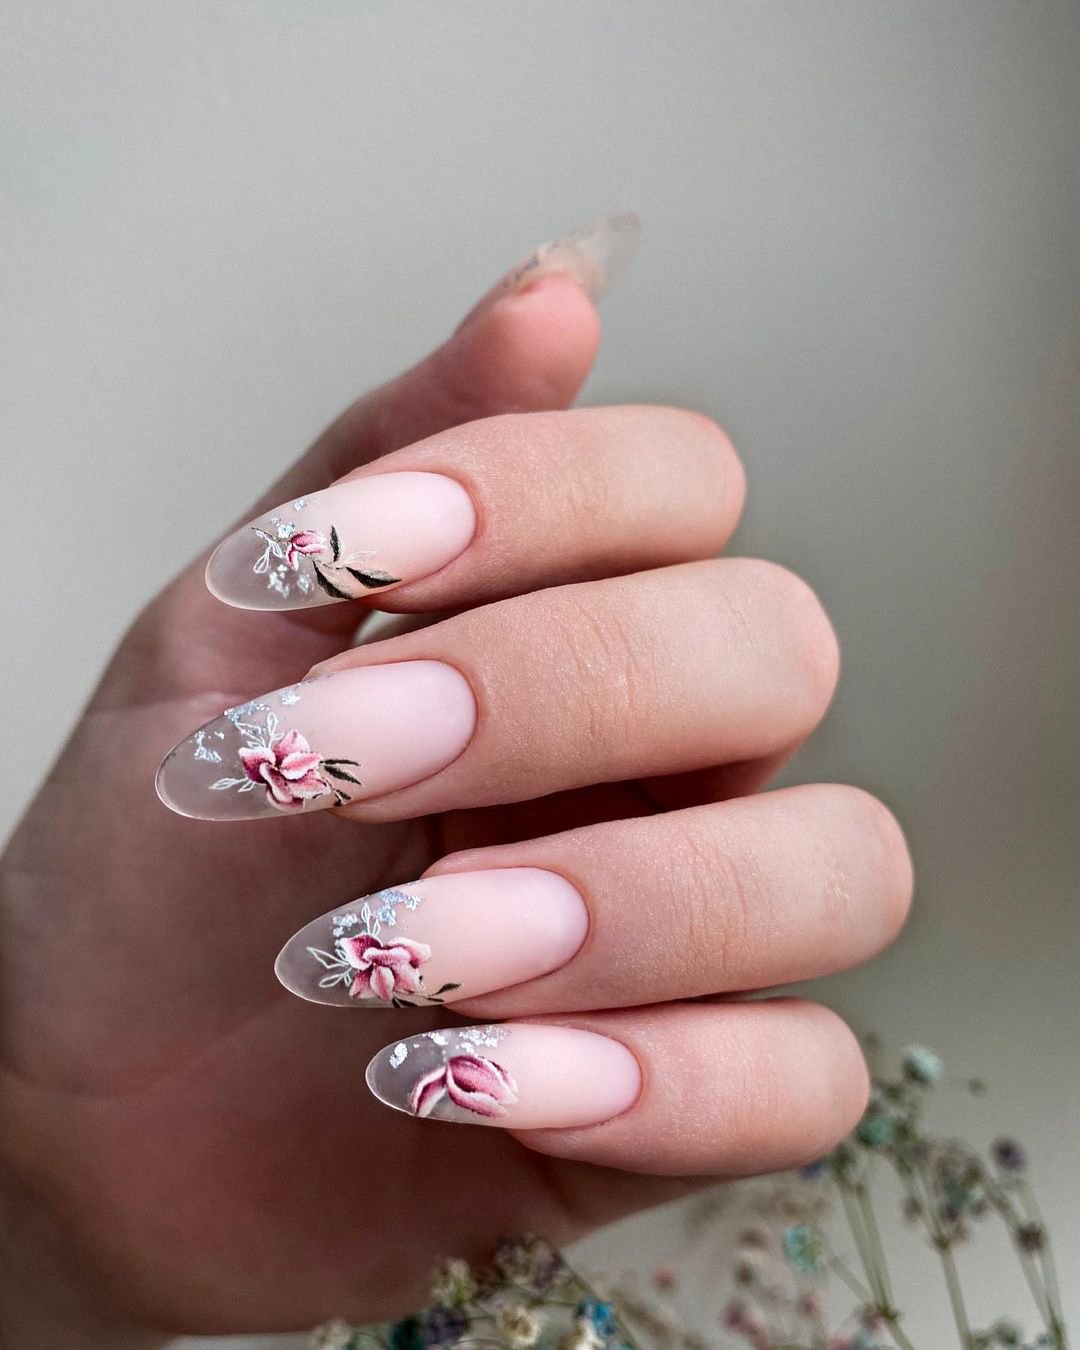 nail design bridal ideas for wedding acrylic pink with flowers nails_harbor